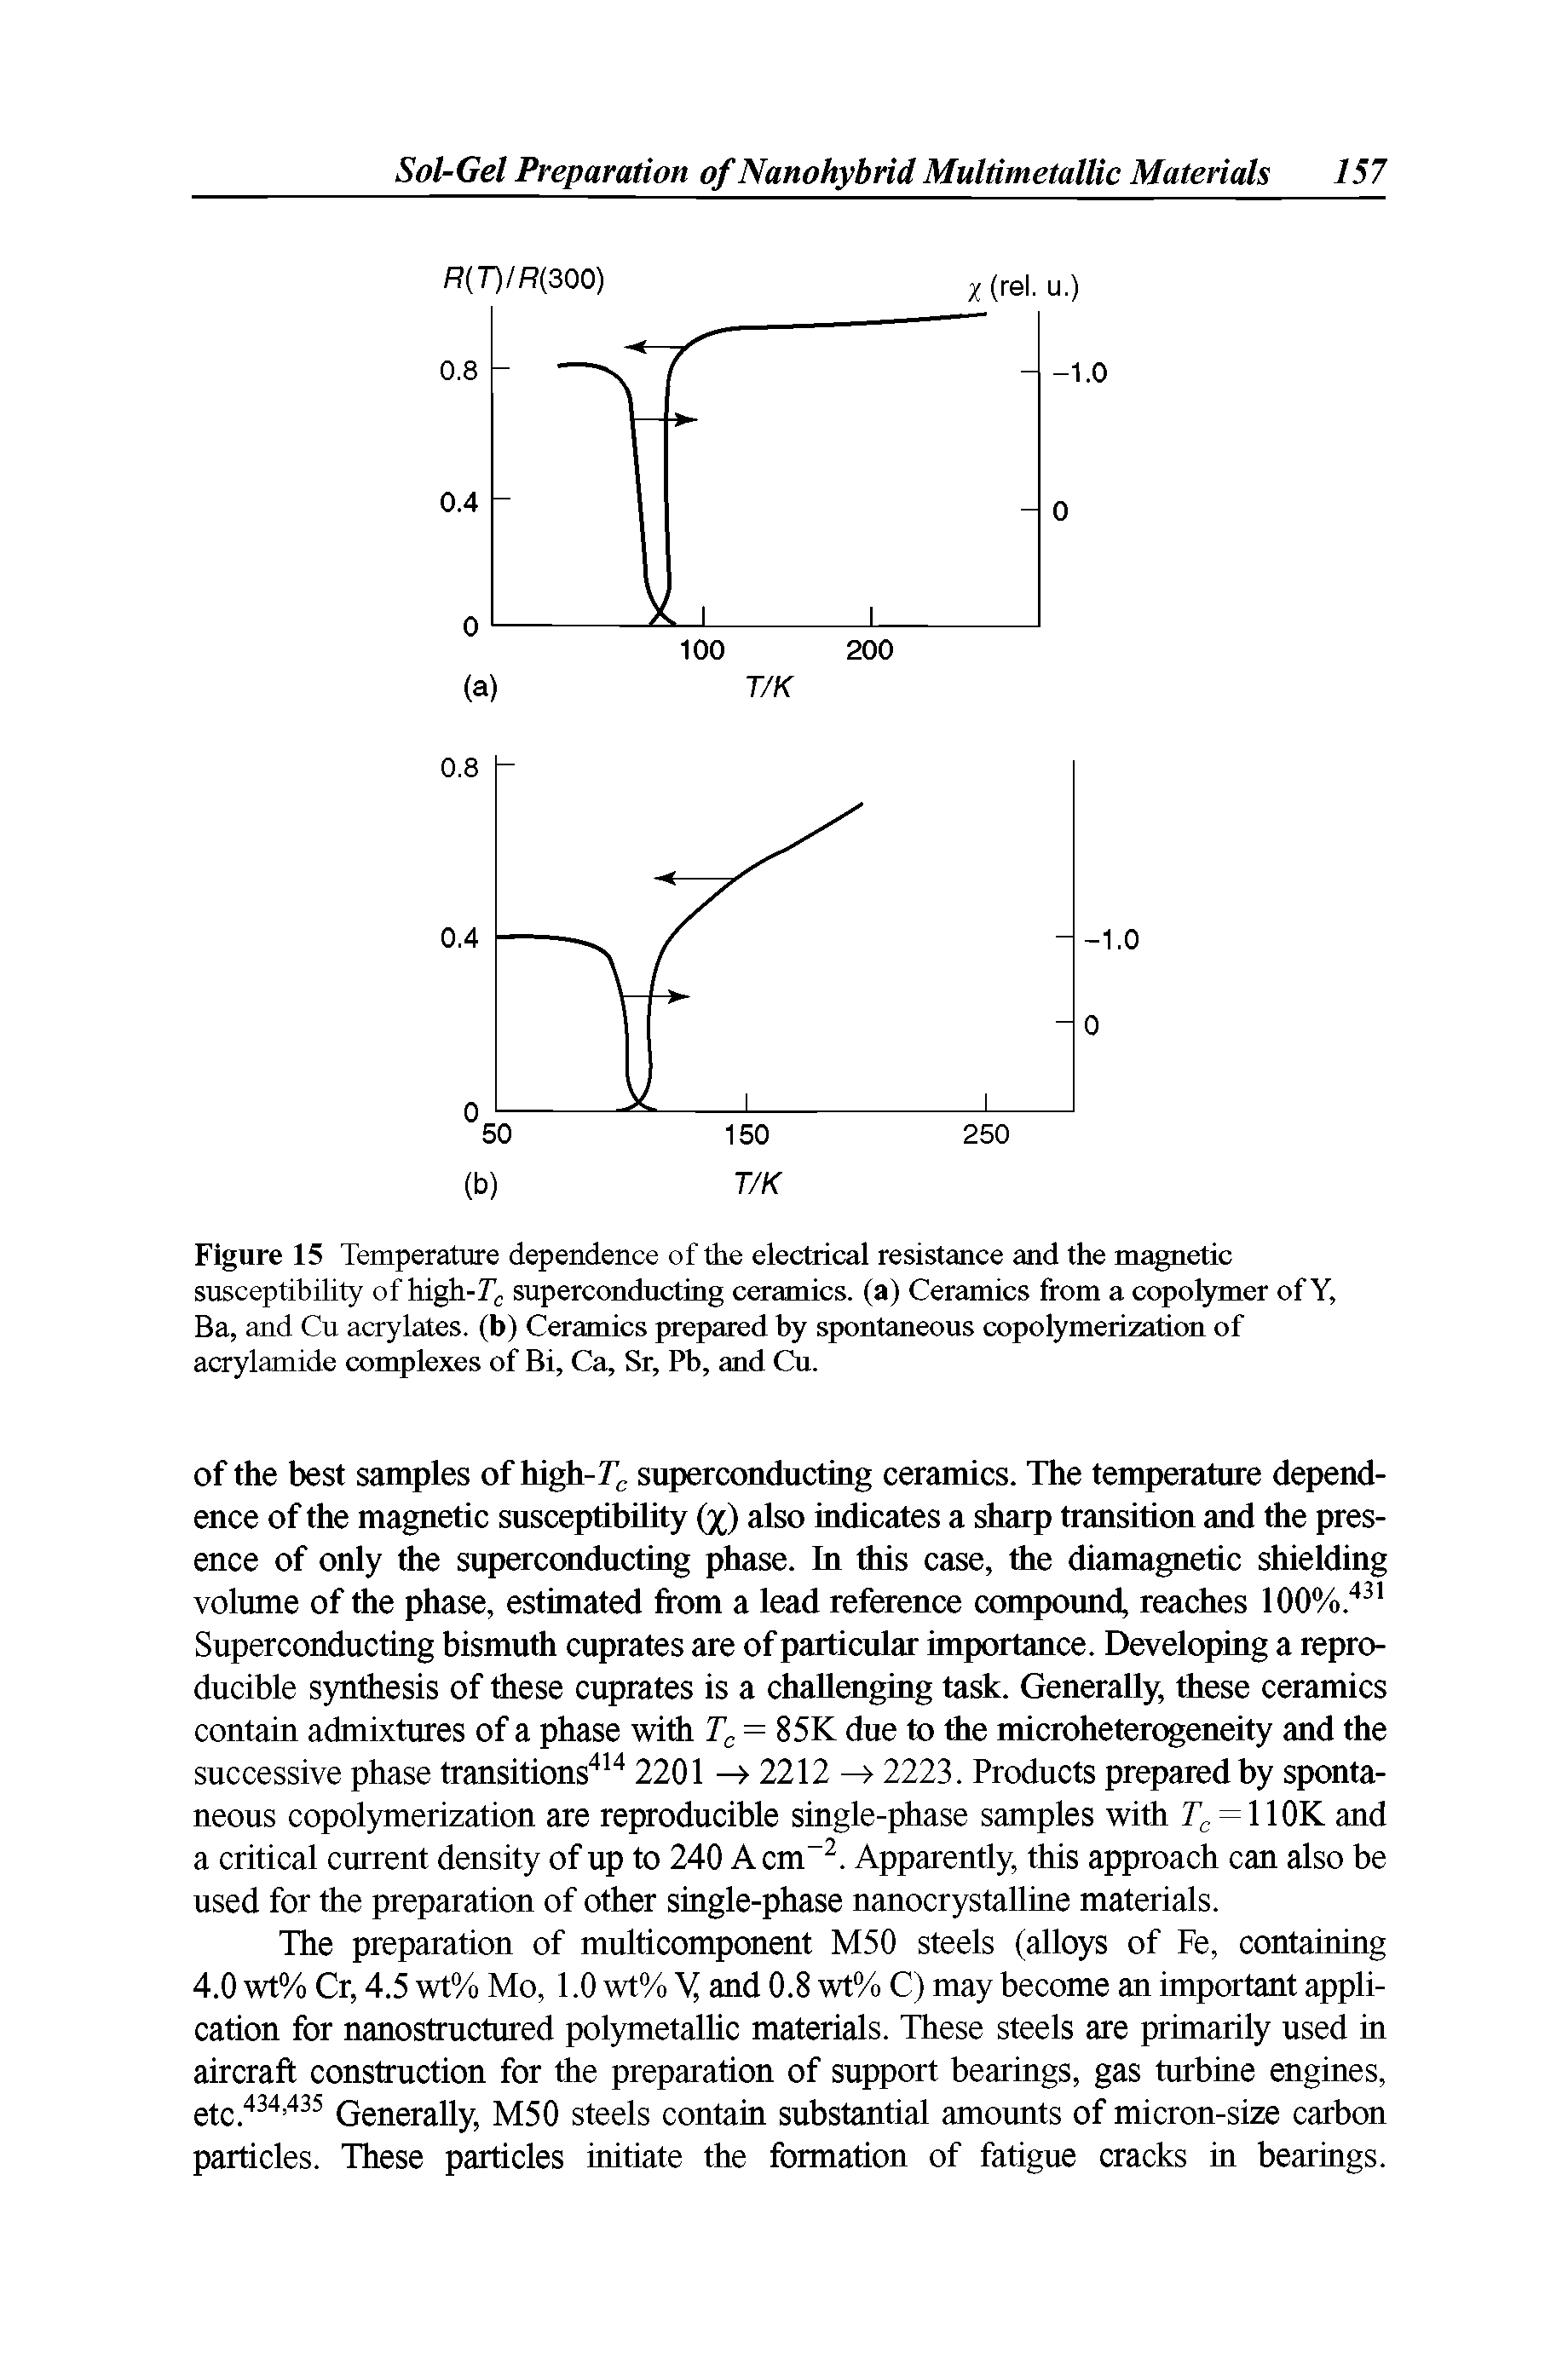 Figure 15 Temperature dependence of the electrical resistance and the magnetic susceptibility of high-superconducting ceramics, (a) Ceramics from a copolymer ofY, Ba, and Cu acrylates, (b) Ceramics prepared by spontaneous copolymerization of acrylamide complexes of Bi, Ca, Sr, Pb, and Cu.